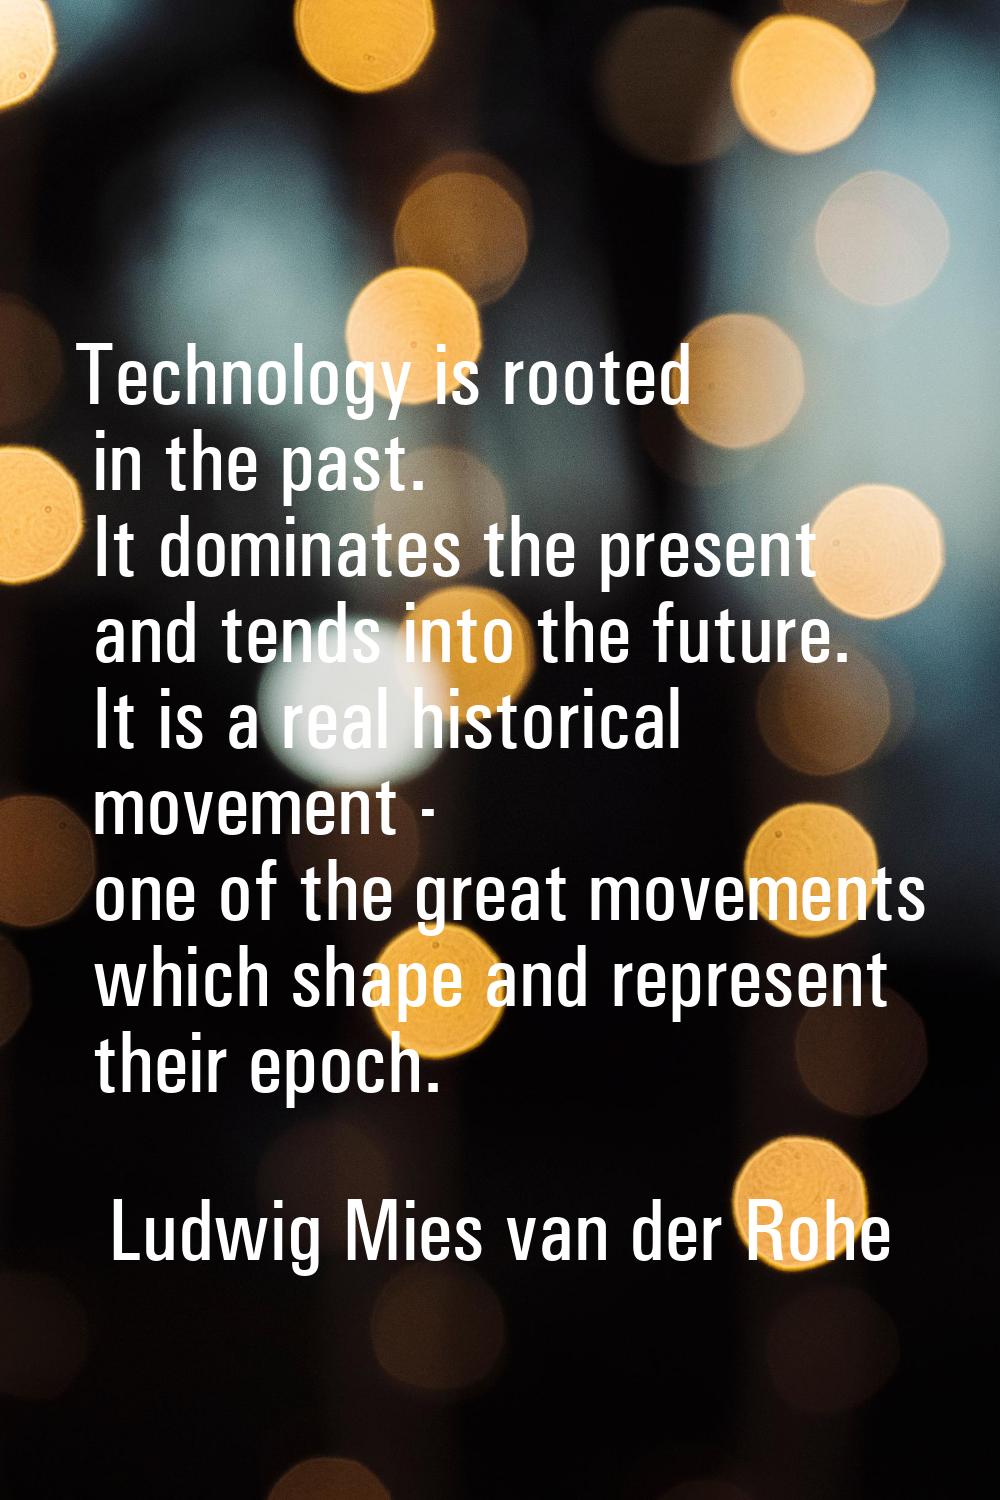 Technology is rooted in the past. It dominates the present and tends into the future. It is a real 